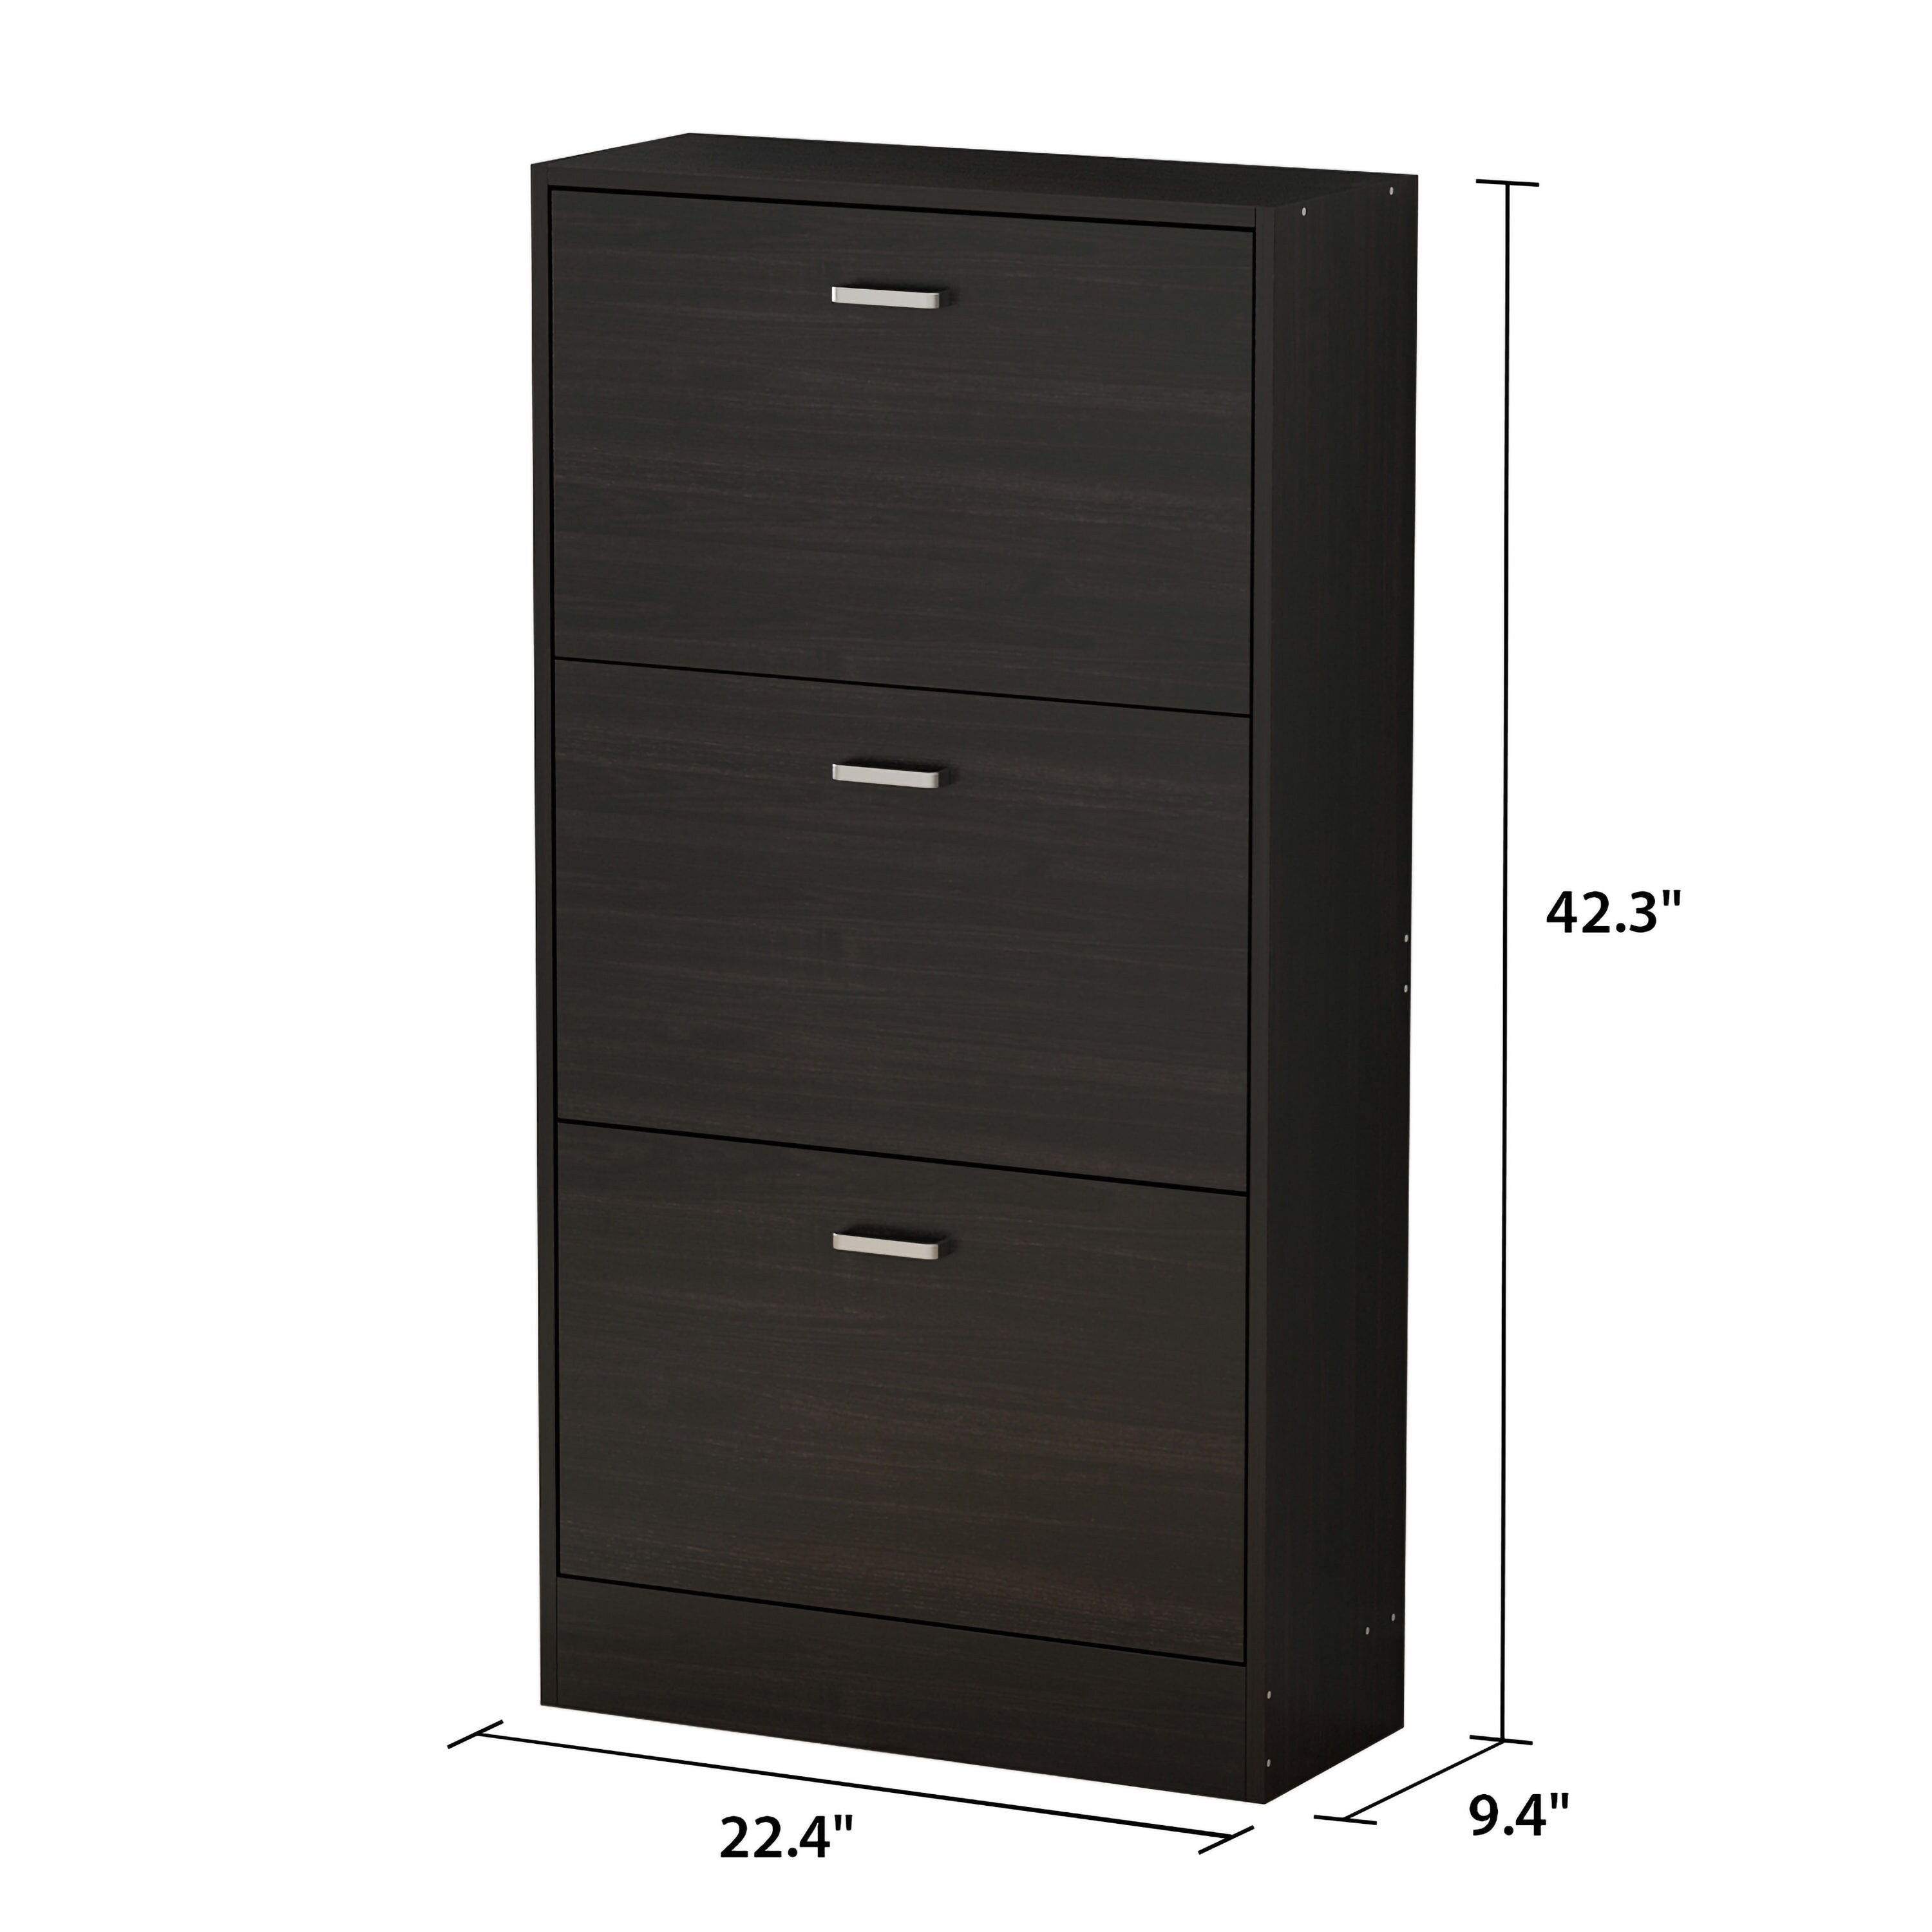 FUFU&GAGA 23.6 in. W x 31.4 in. H Black Wood 2-Drawer Shoe Storage Cabinet with Foldable Compartments Entryway Hallway (12-Pair)